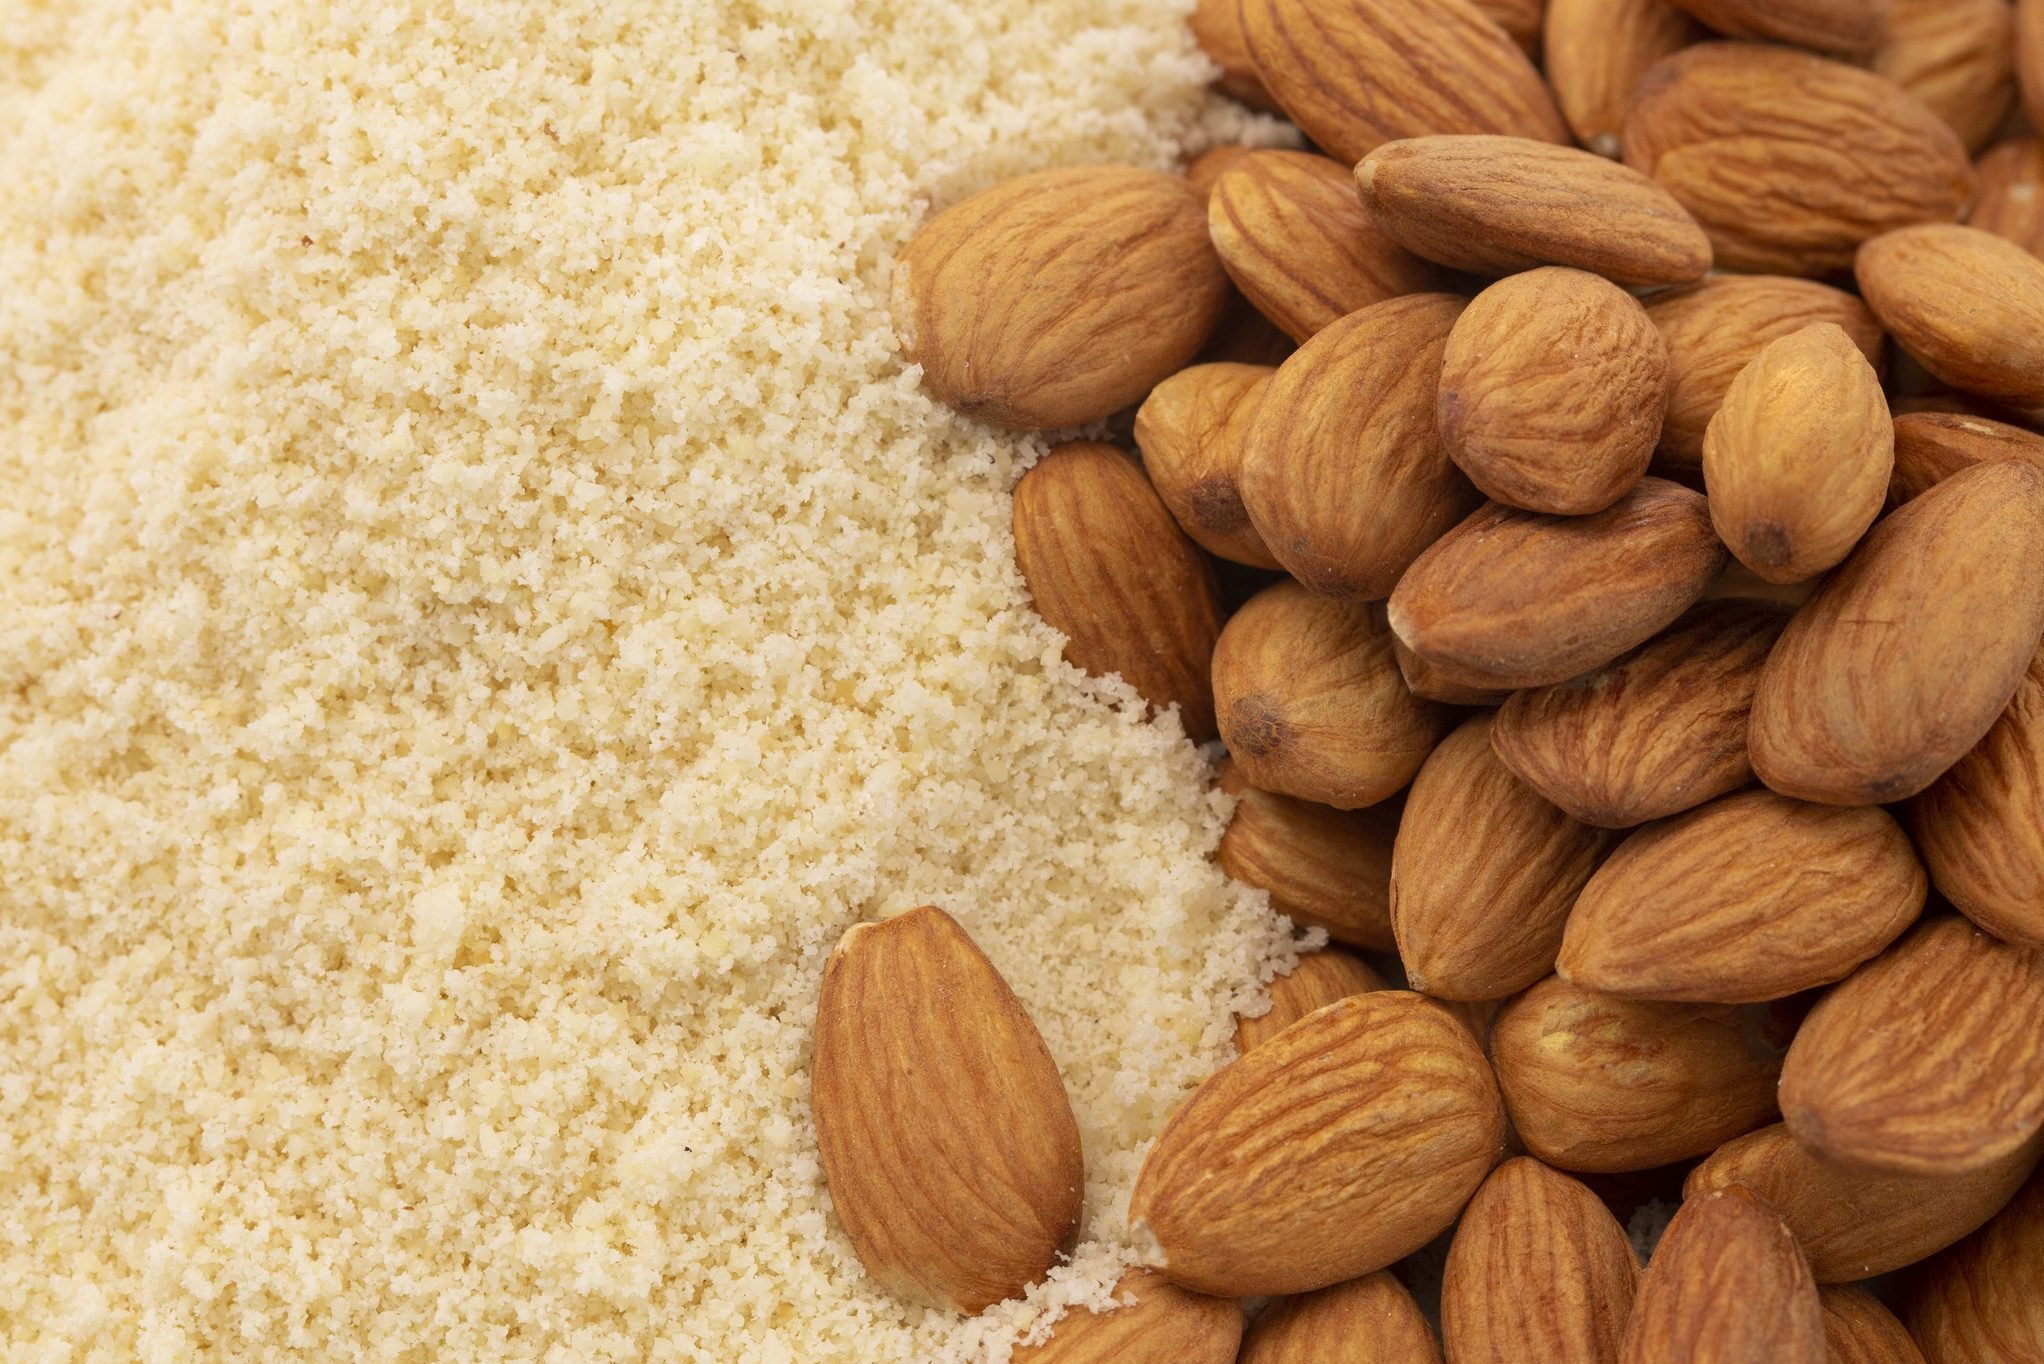 is almond flour good for people with diabetes?